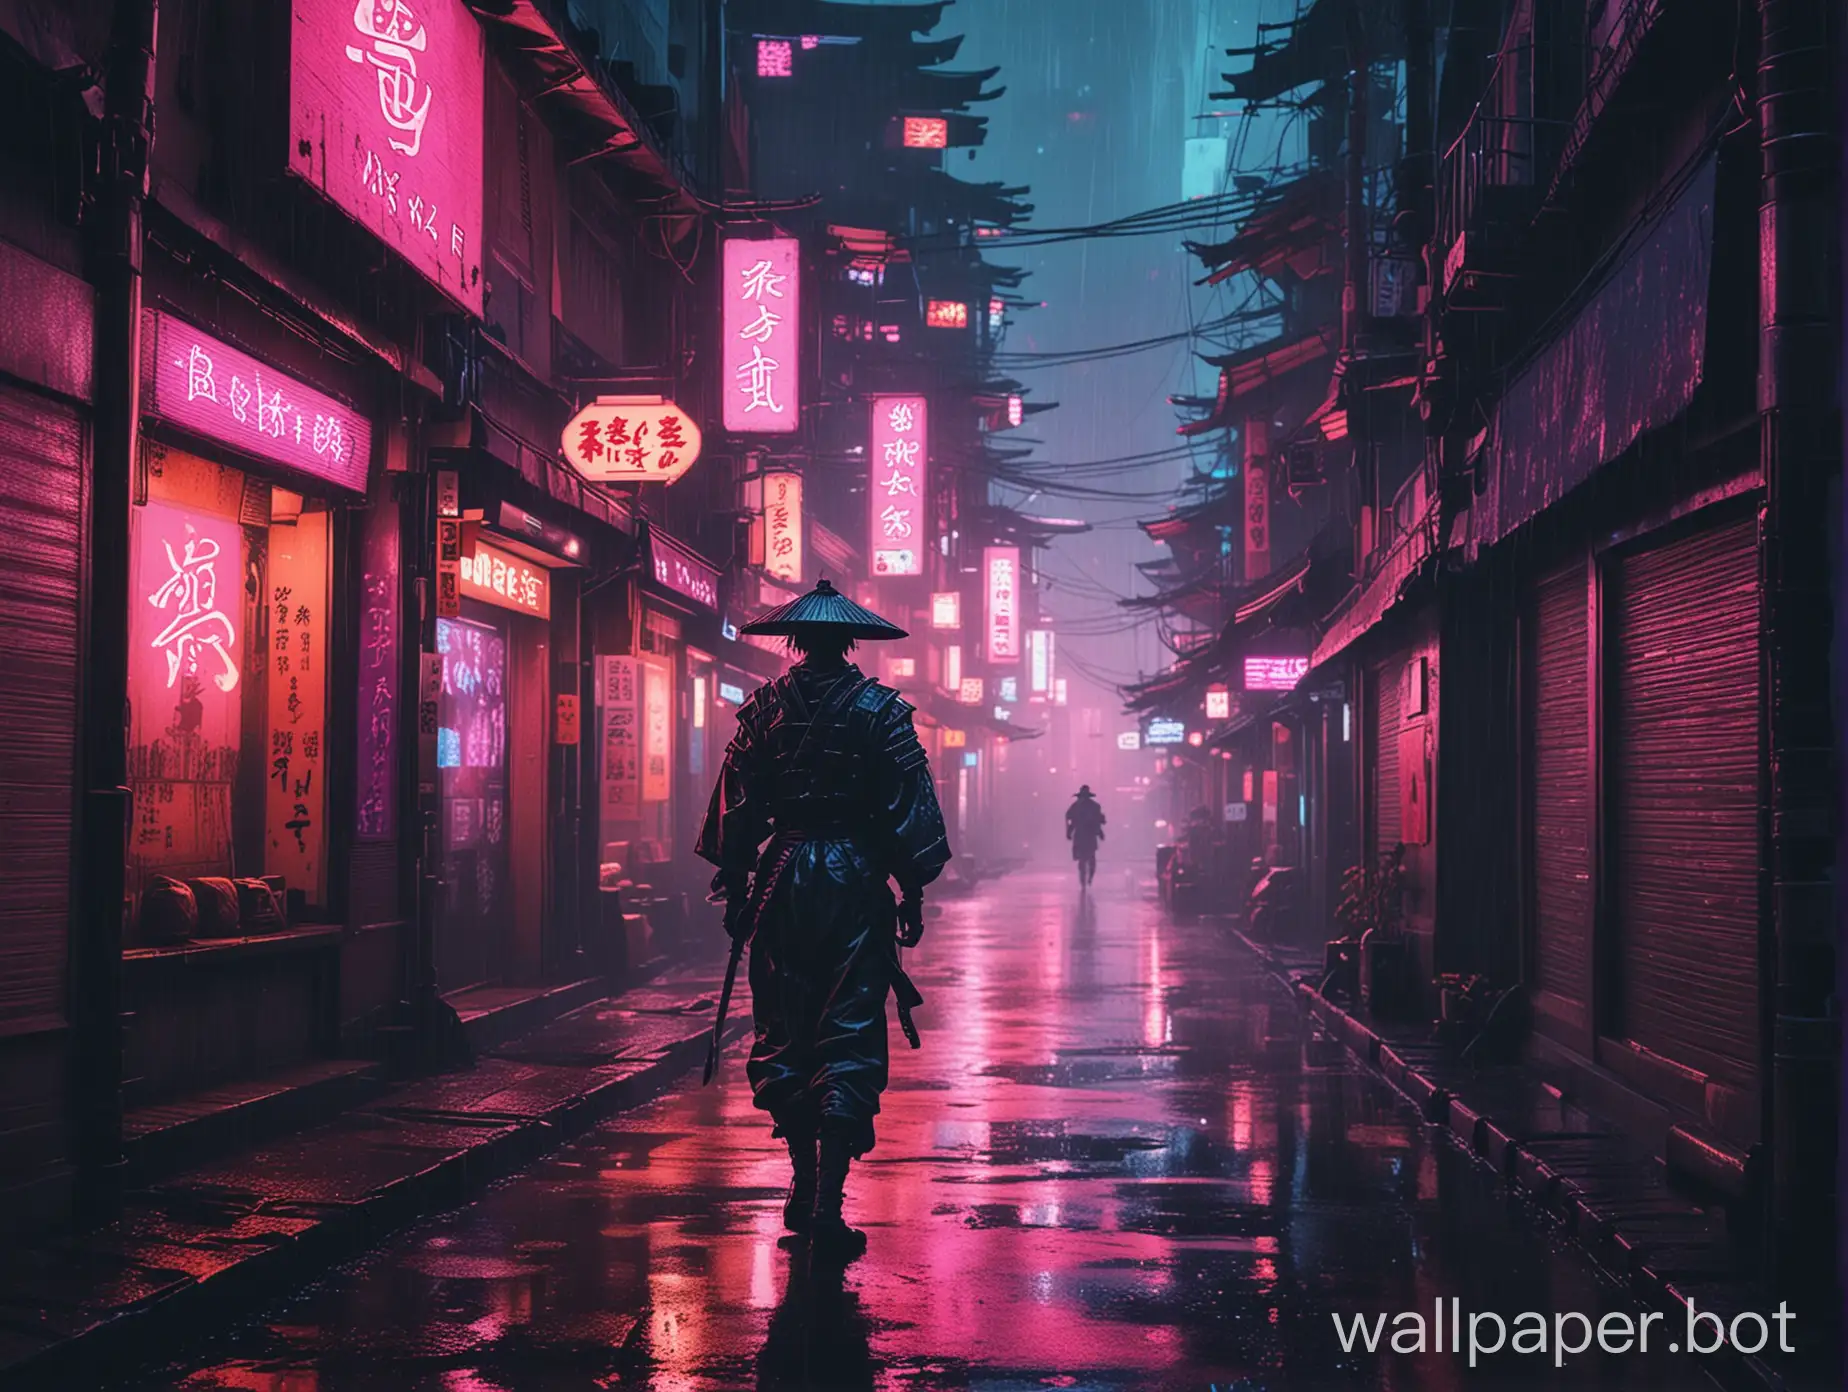 A samurai walking through a dark dingy rainy neon-light filled city in a very 80s retrowave vibe.